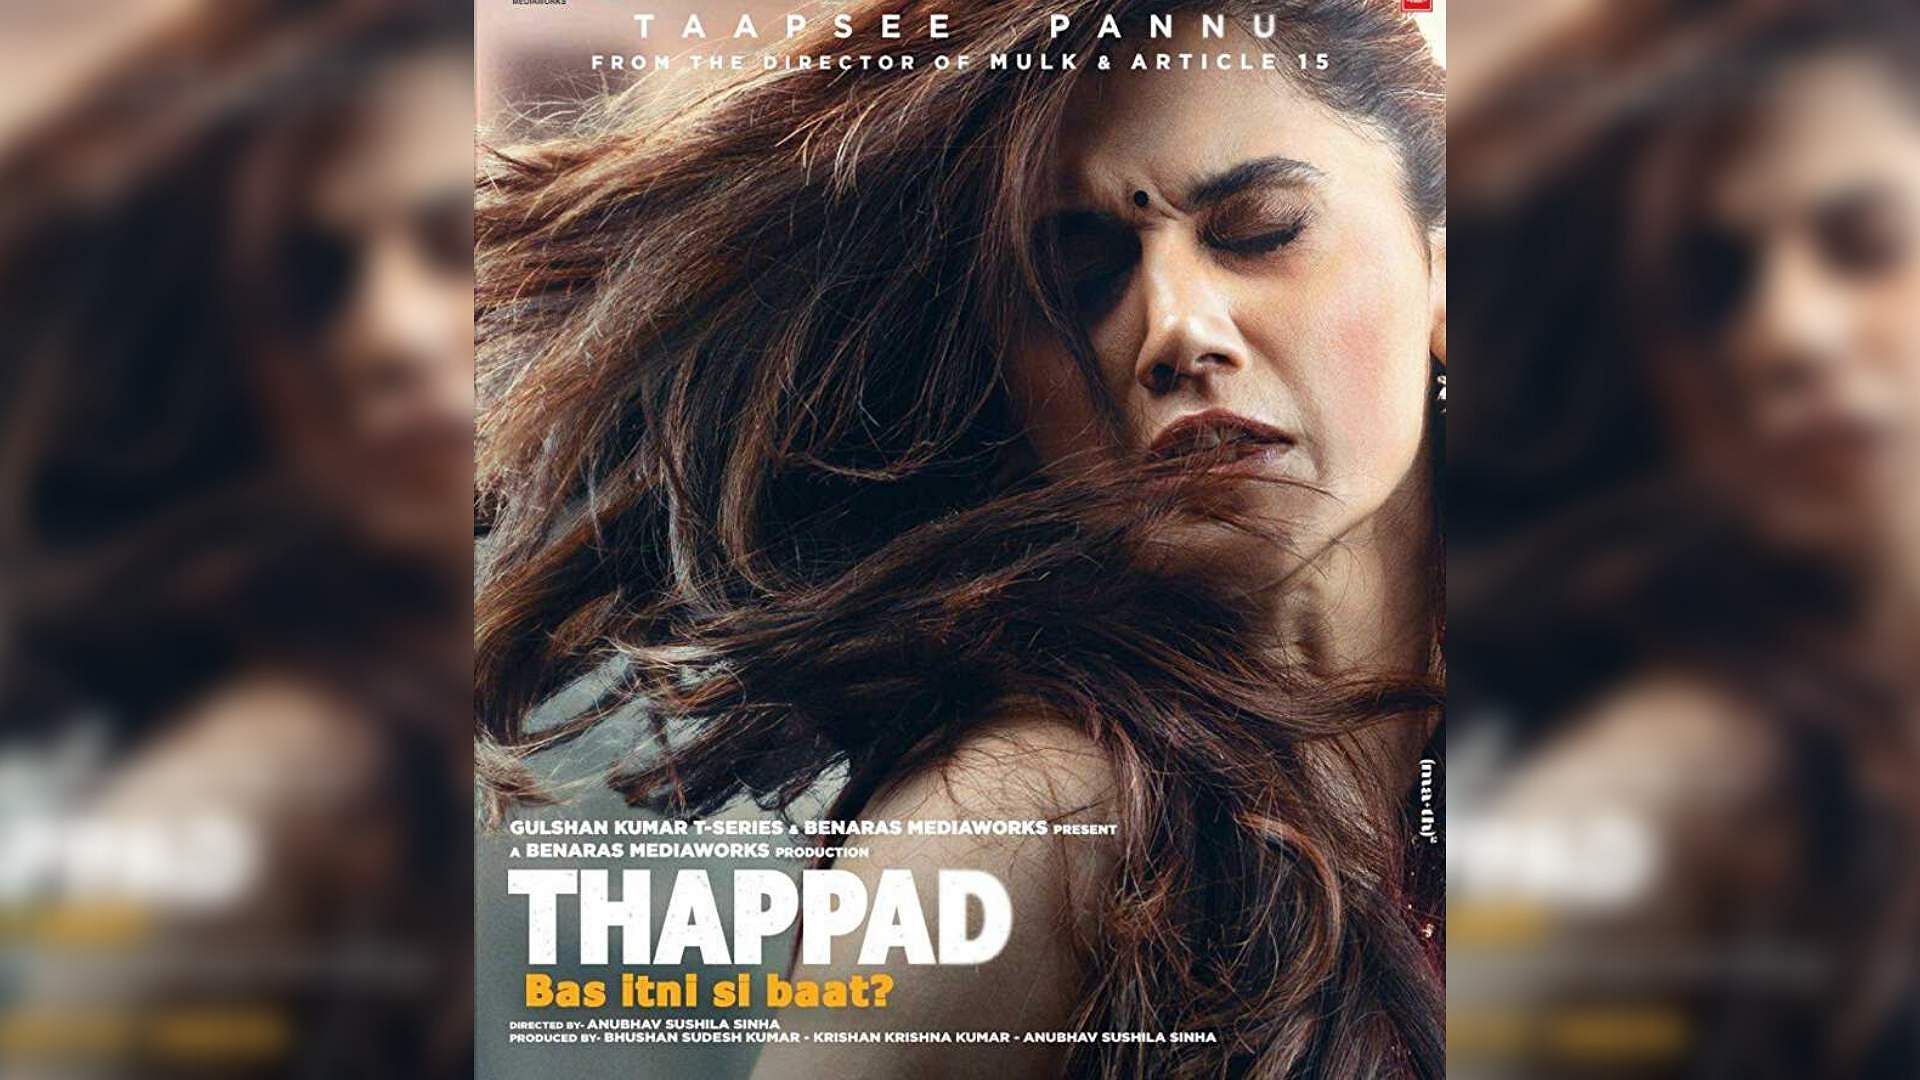 Taapsee Pannu’s <i>Thappad </i>has been declared exempt from SGST in Madhya Pradesh.